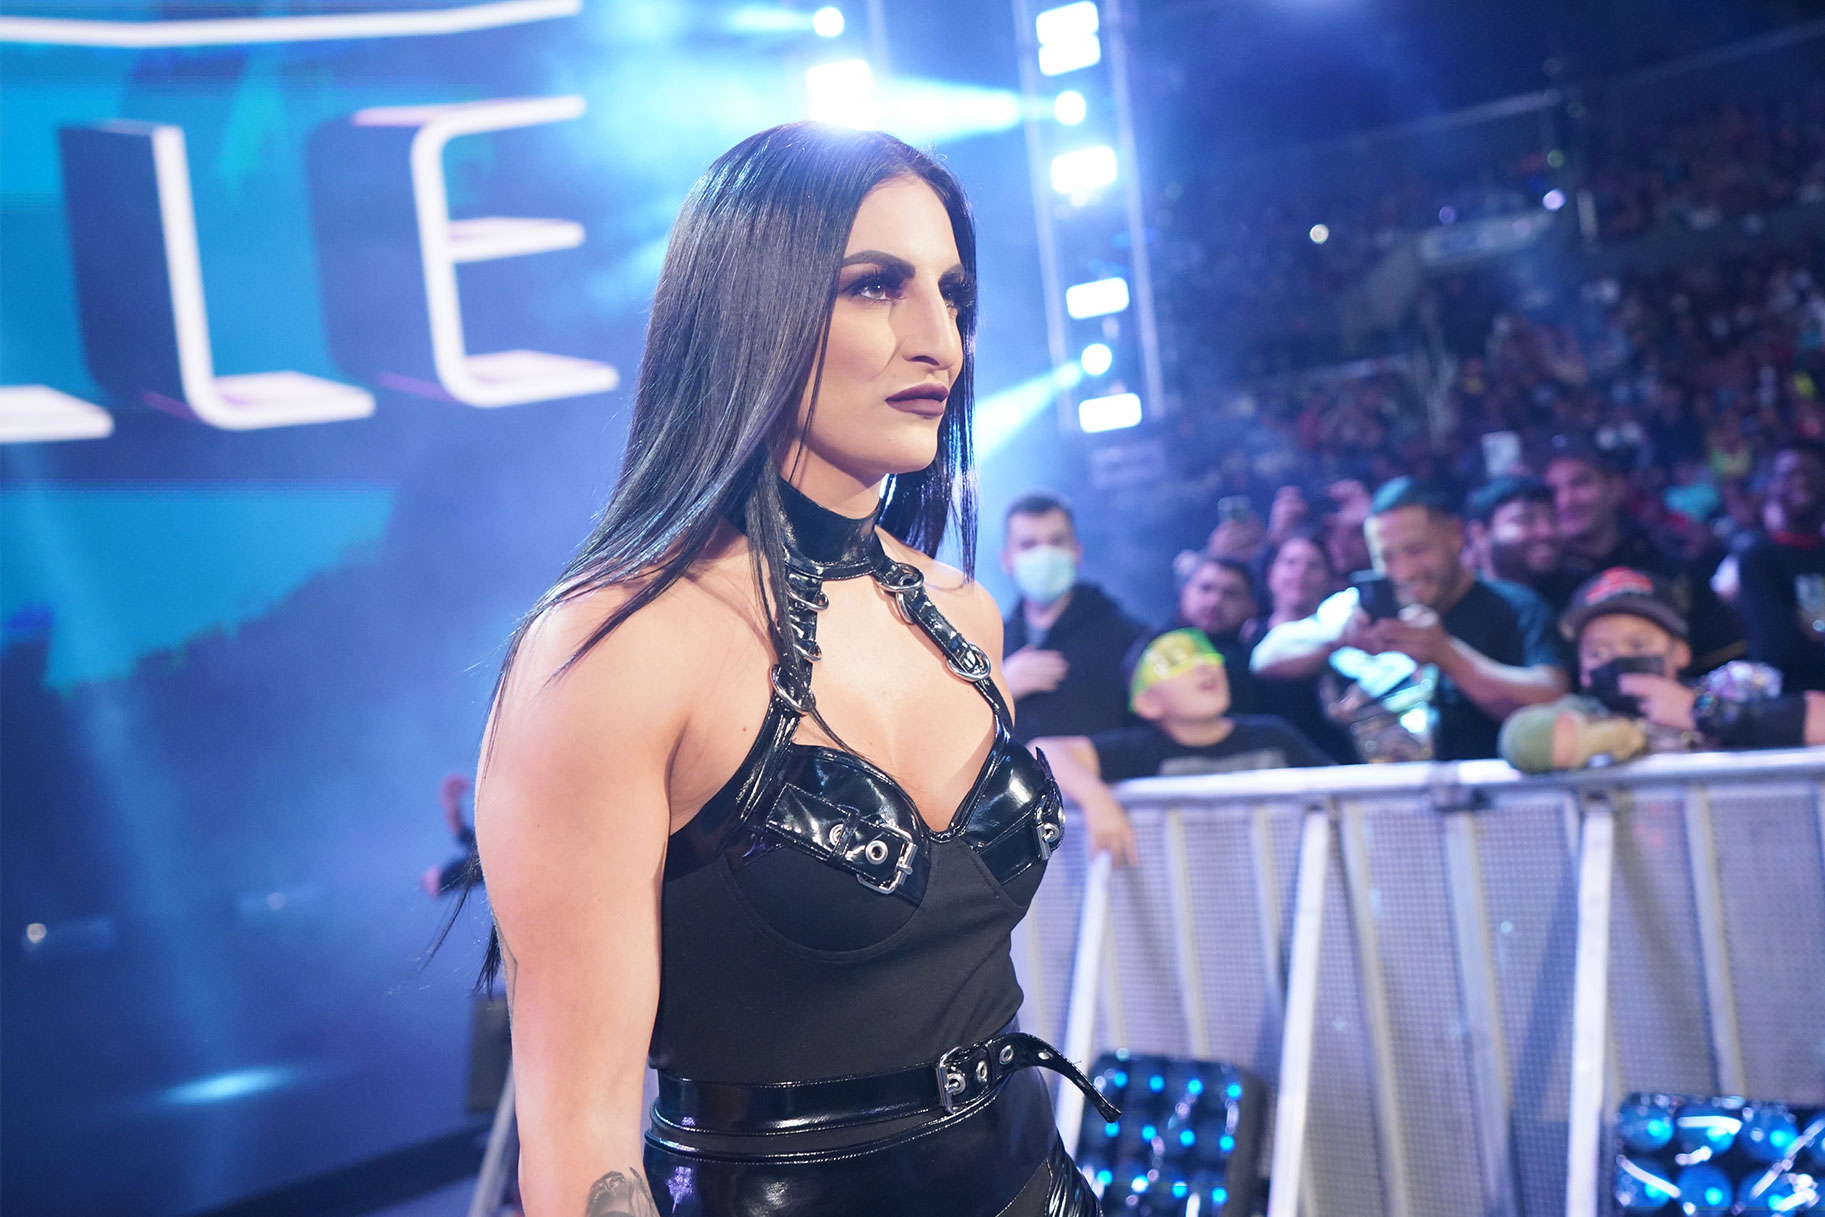 Sonya Deville affirmed, ‘The decision to give up the WWE Women’s Tag Team Championships was profoundly crushing for me.’